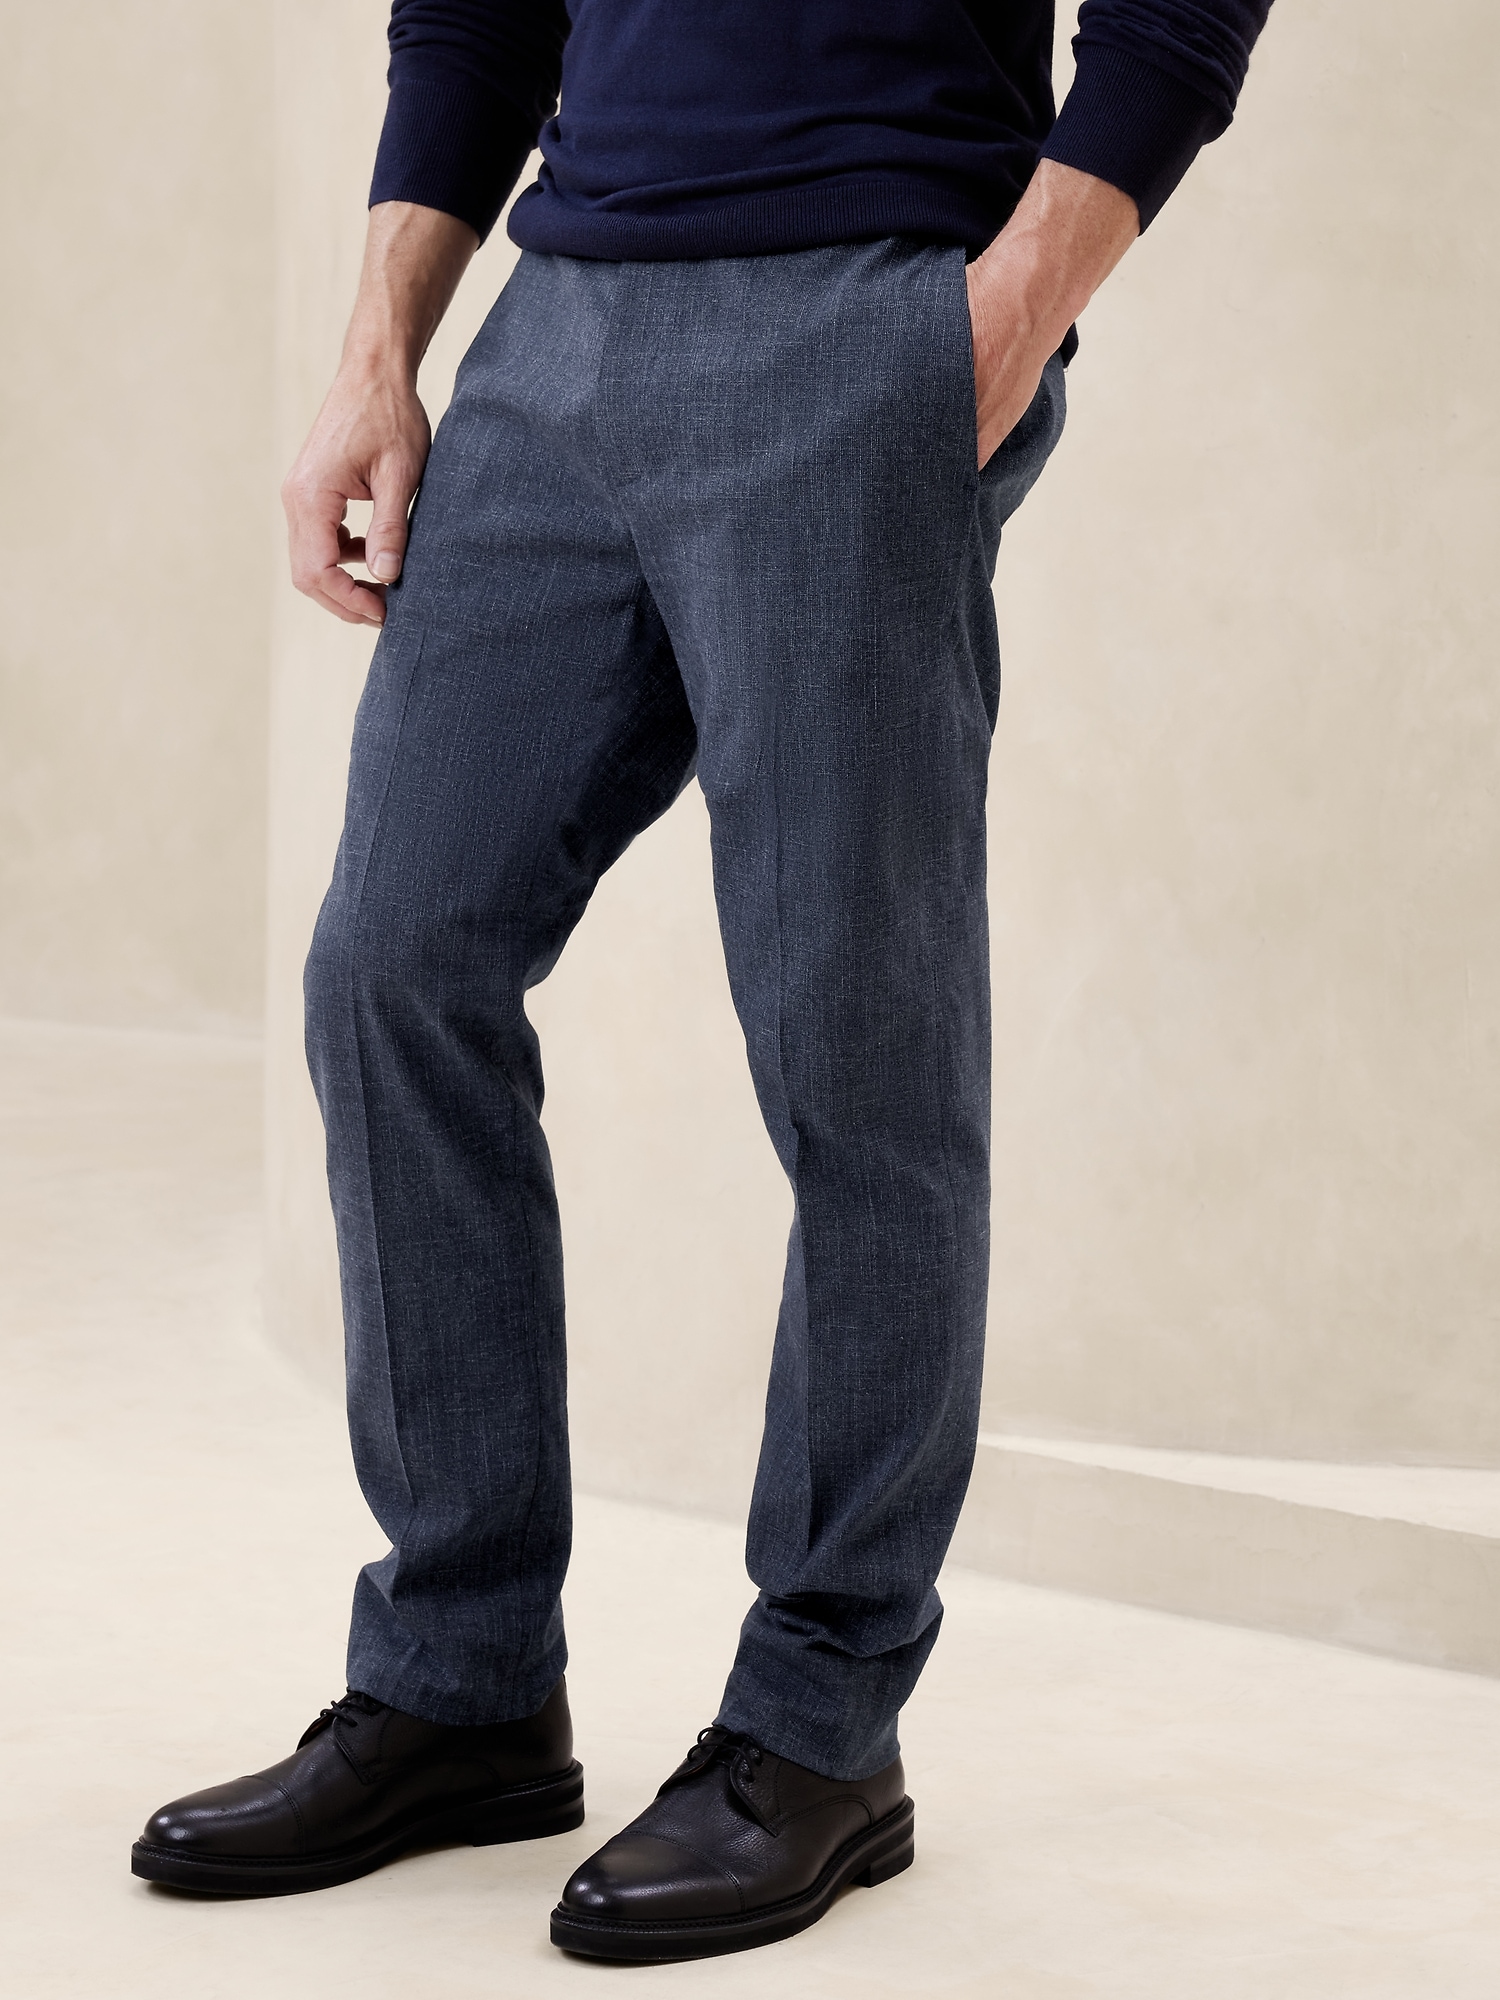 Firoji and Light Grey Color Winkle Free Stretchable Formal Pants